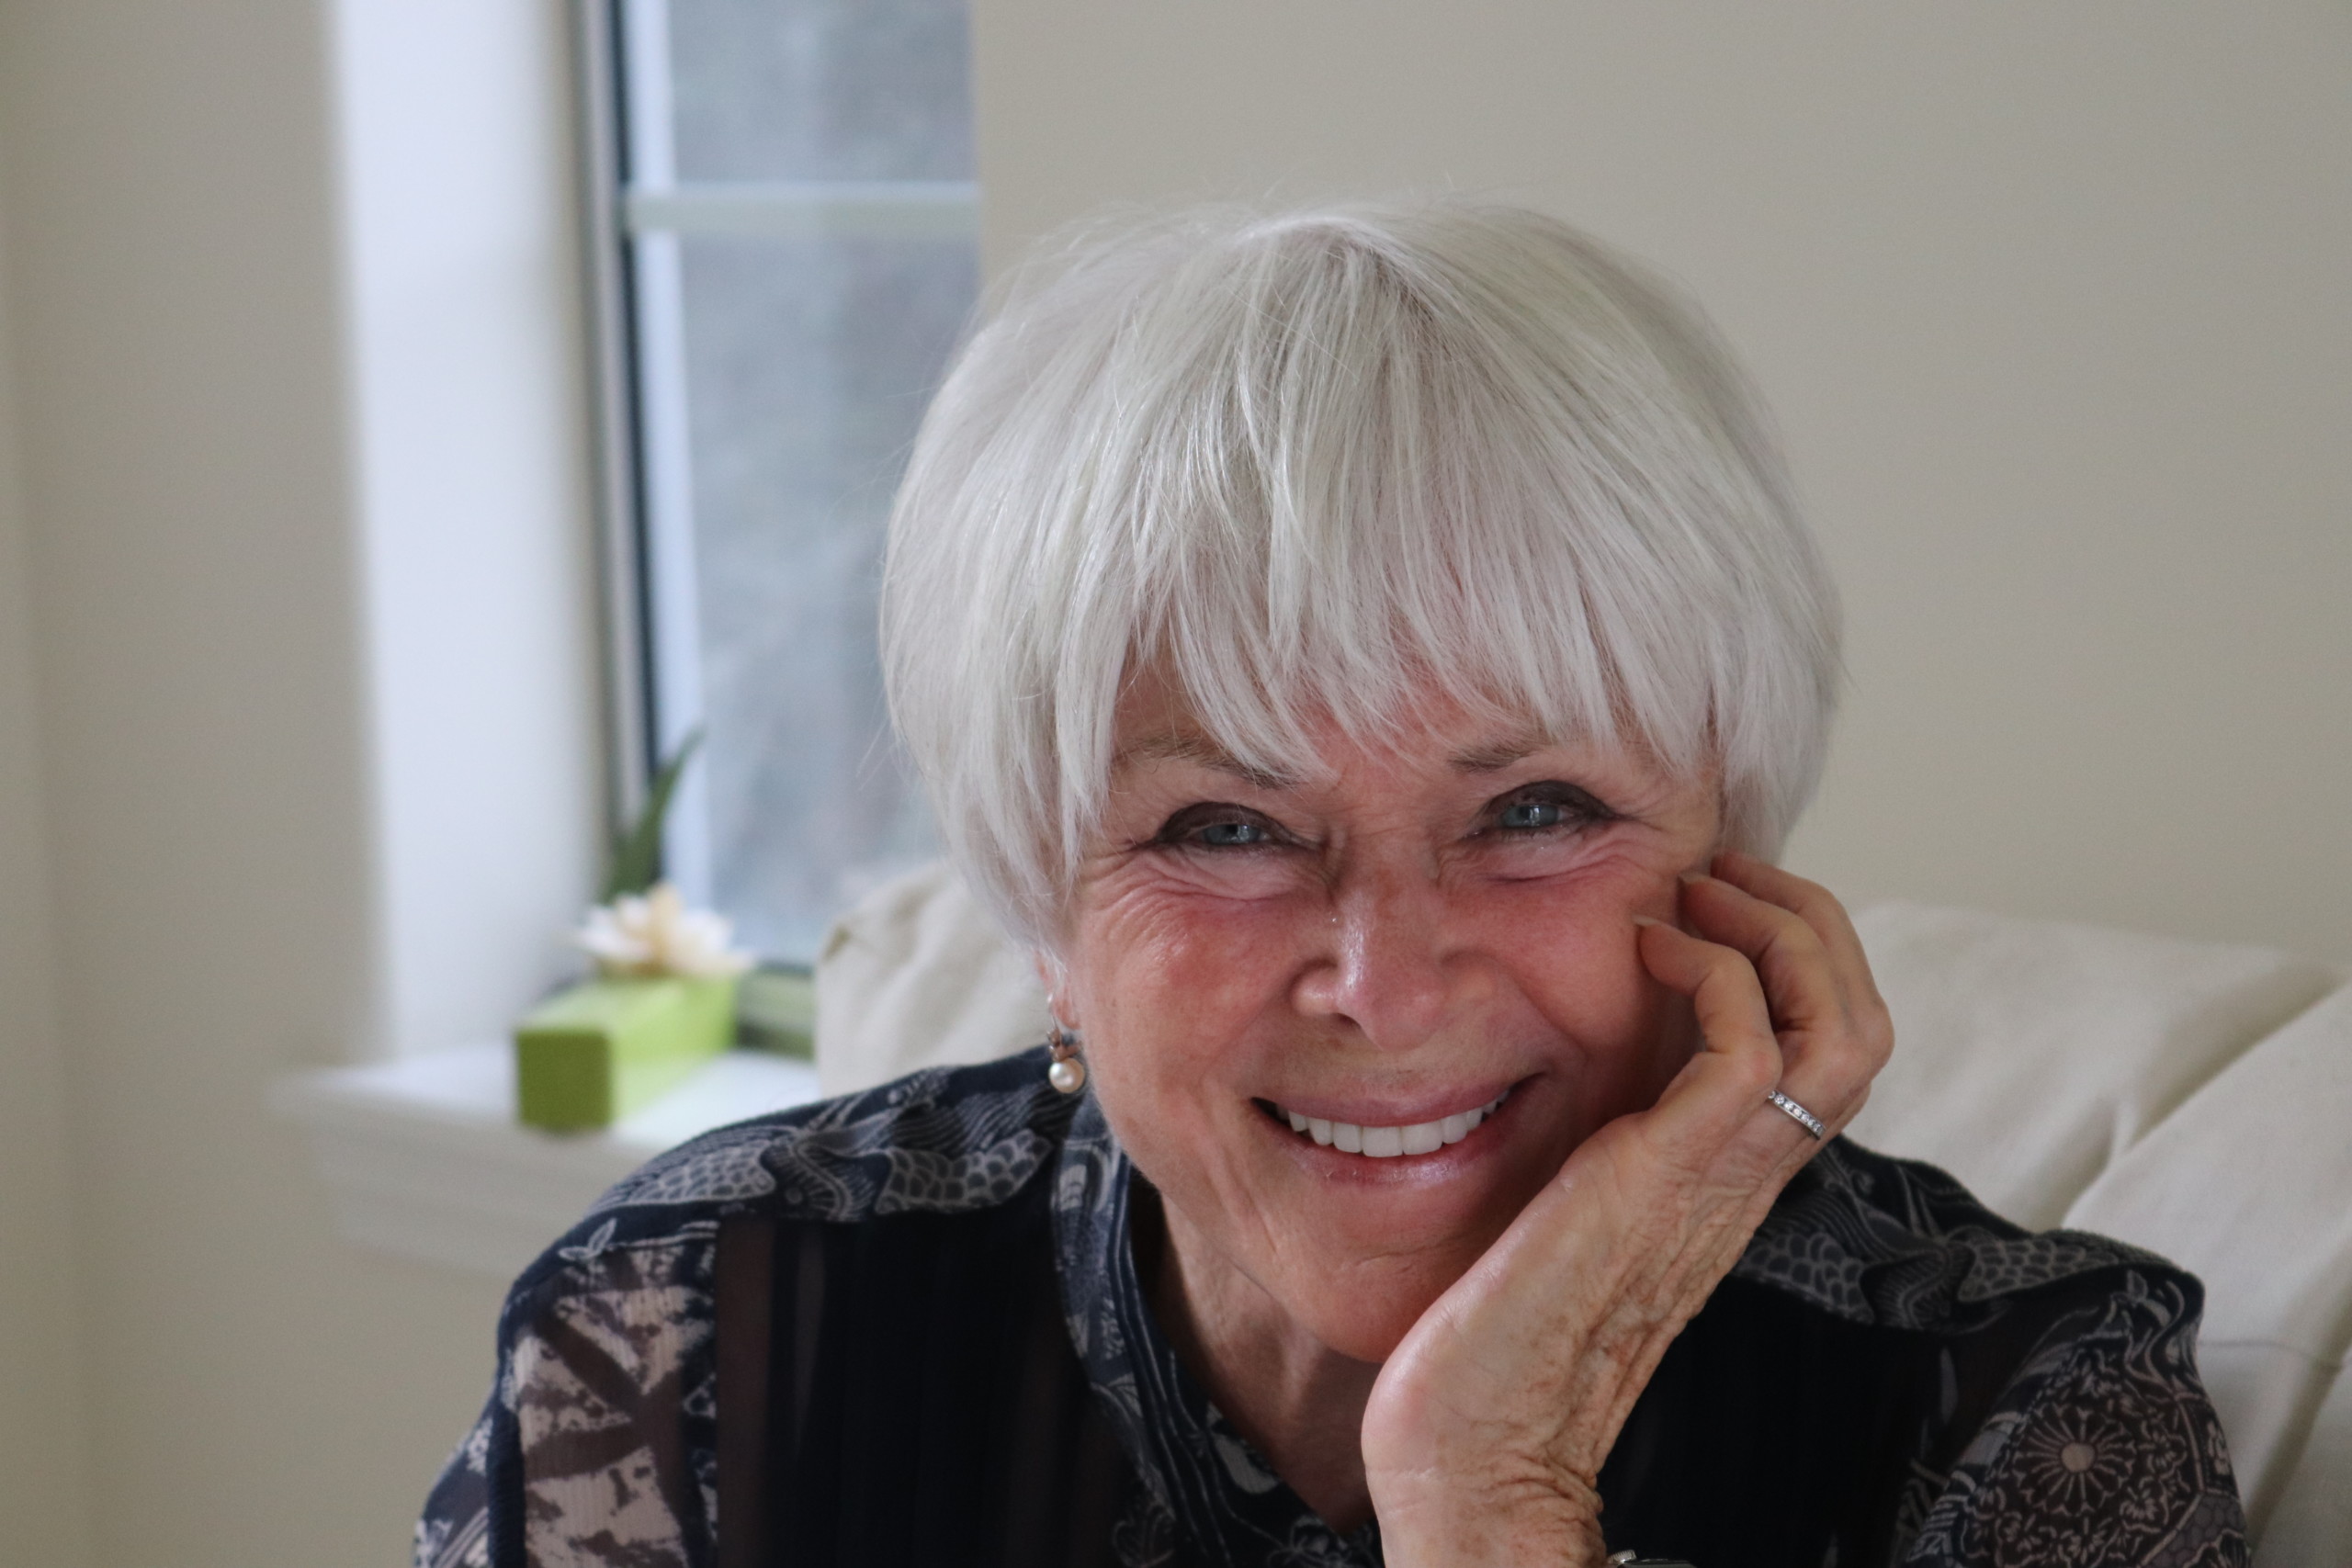 Byron Katie | How To End Suffering, Move Past Fear, Find Inner Peace, Upgrade Your Relationships & More